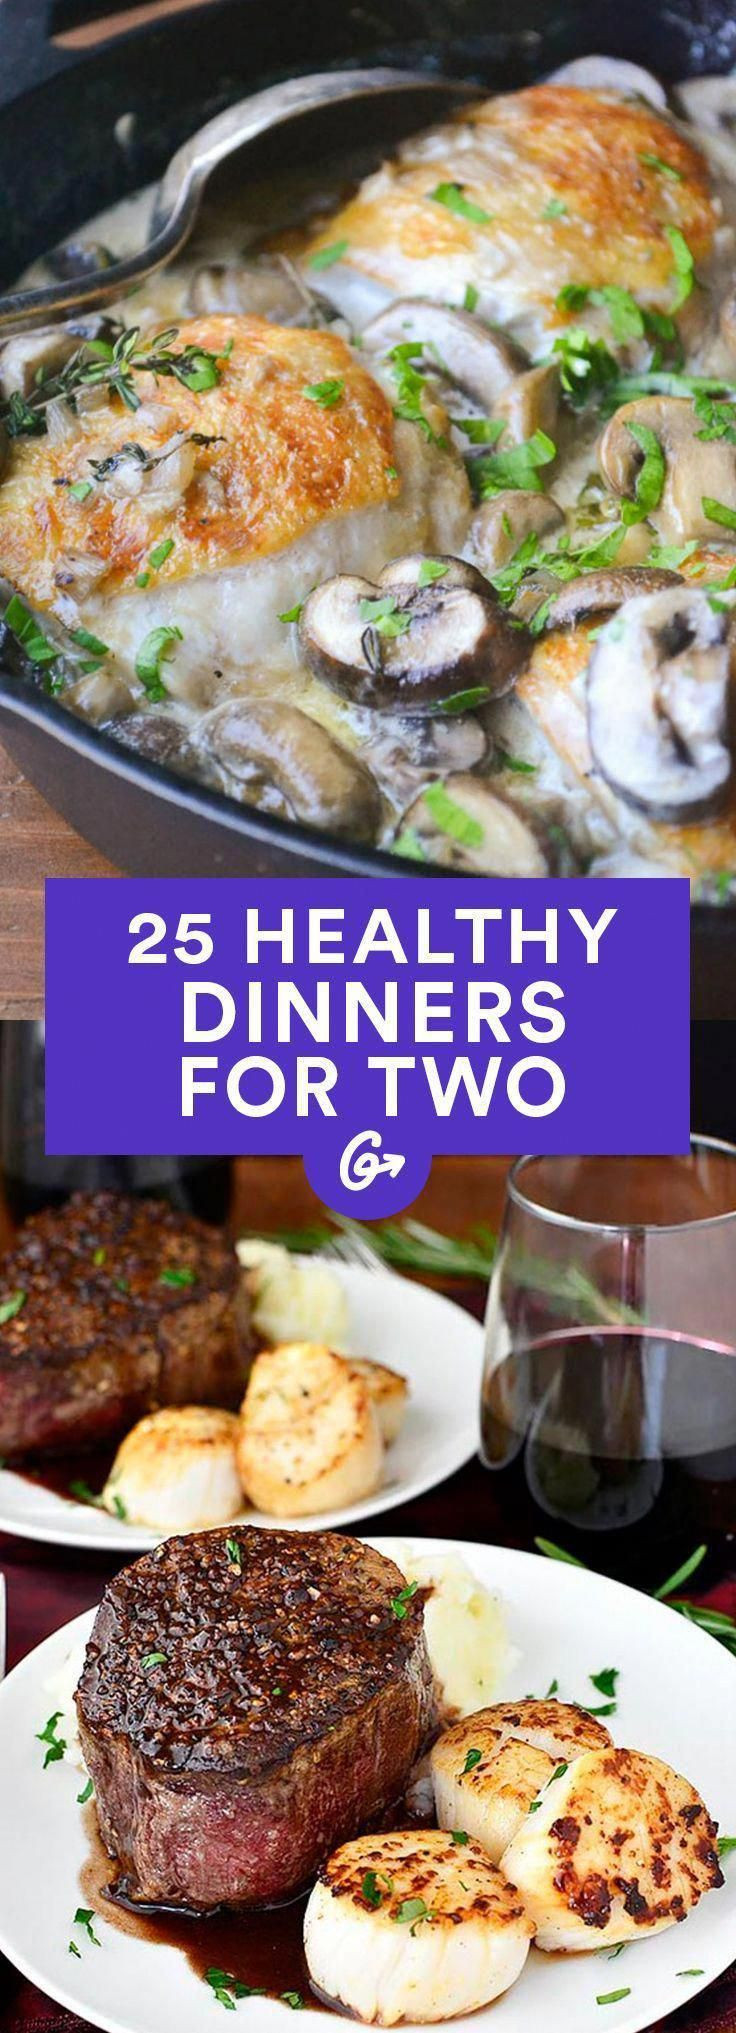 Cheap Dinner Ideas For 2
 Bud Cooking